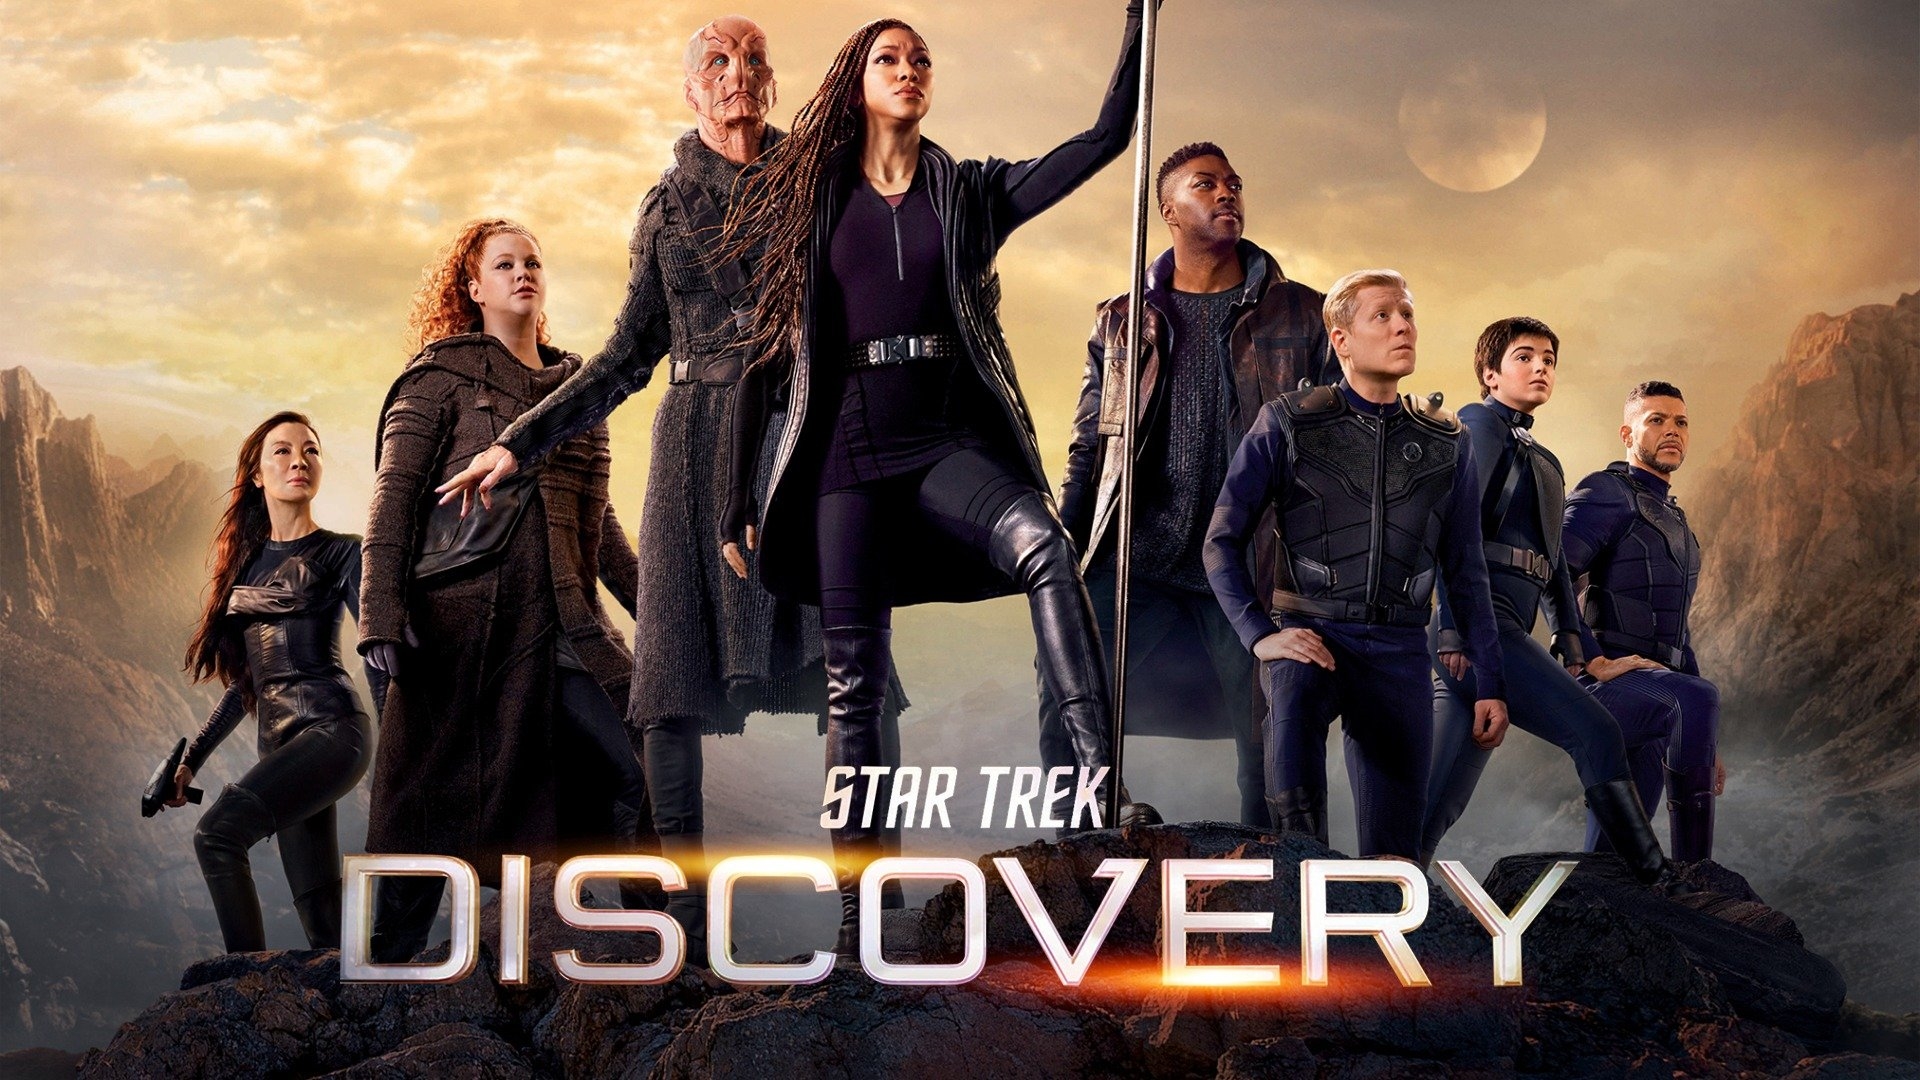 'Star Trek: Discovery' is ending with season 5 next year | DeviceDaily.com